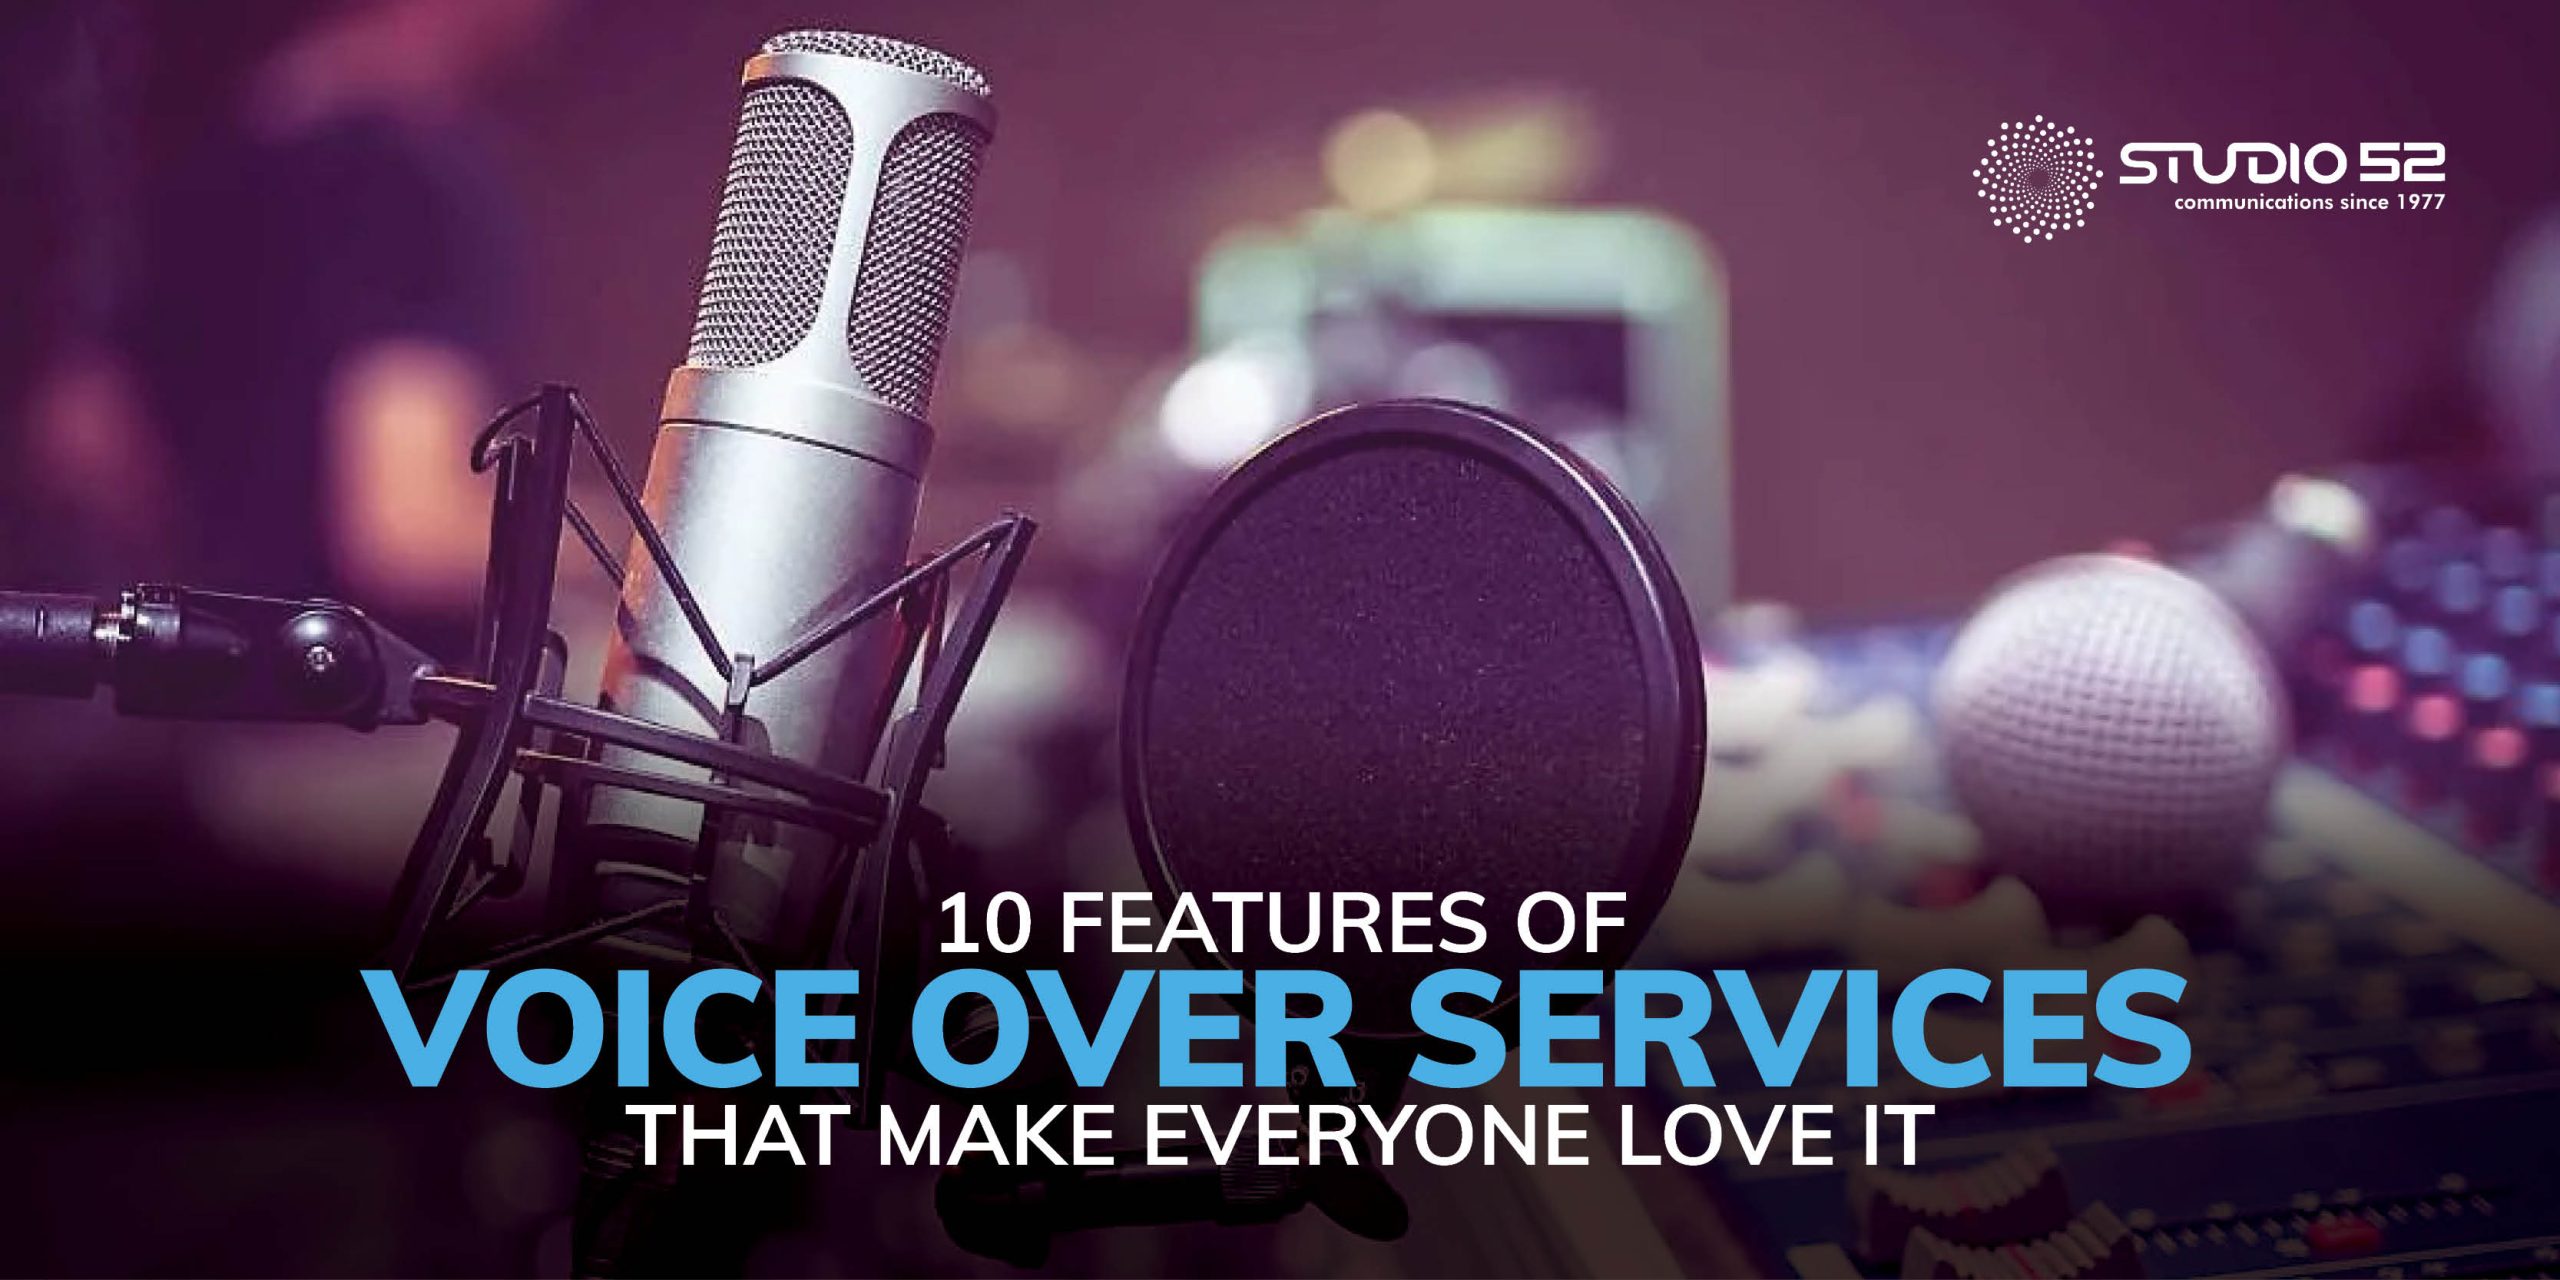 Know the Features and Benefits of Voice Over Services | Studio 52